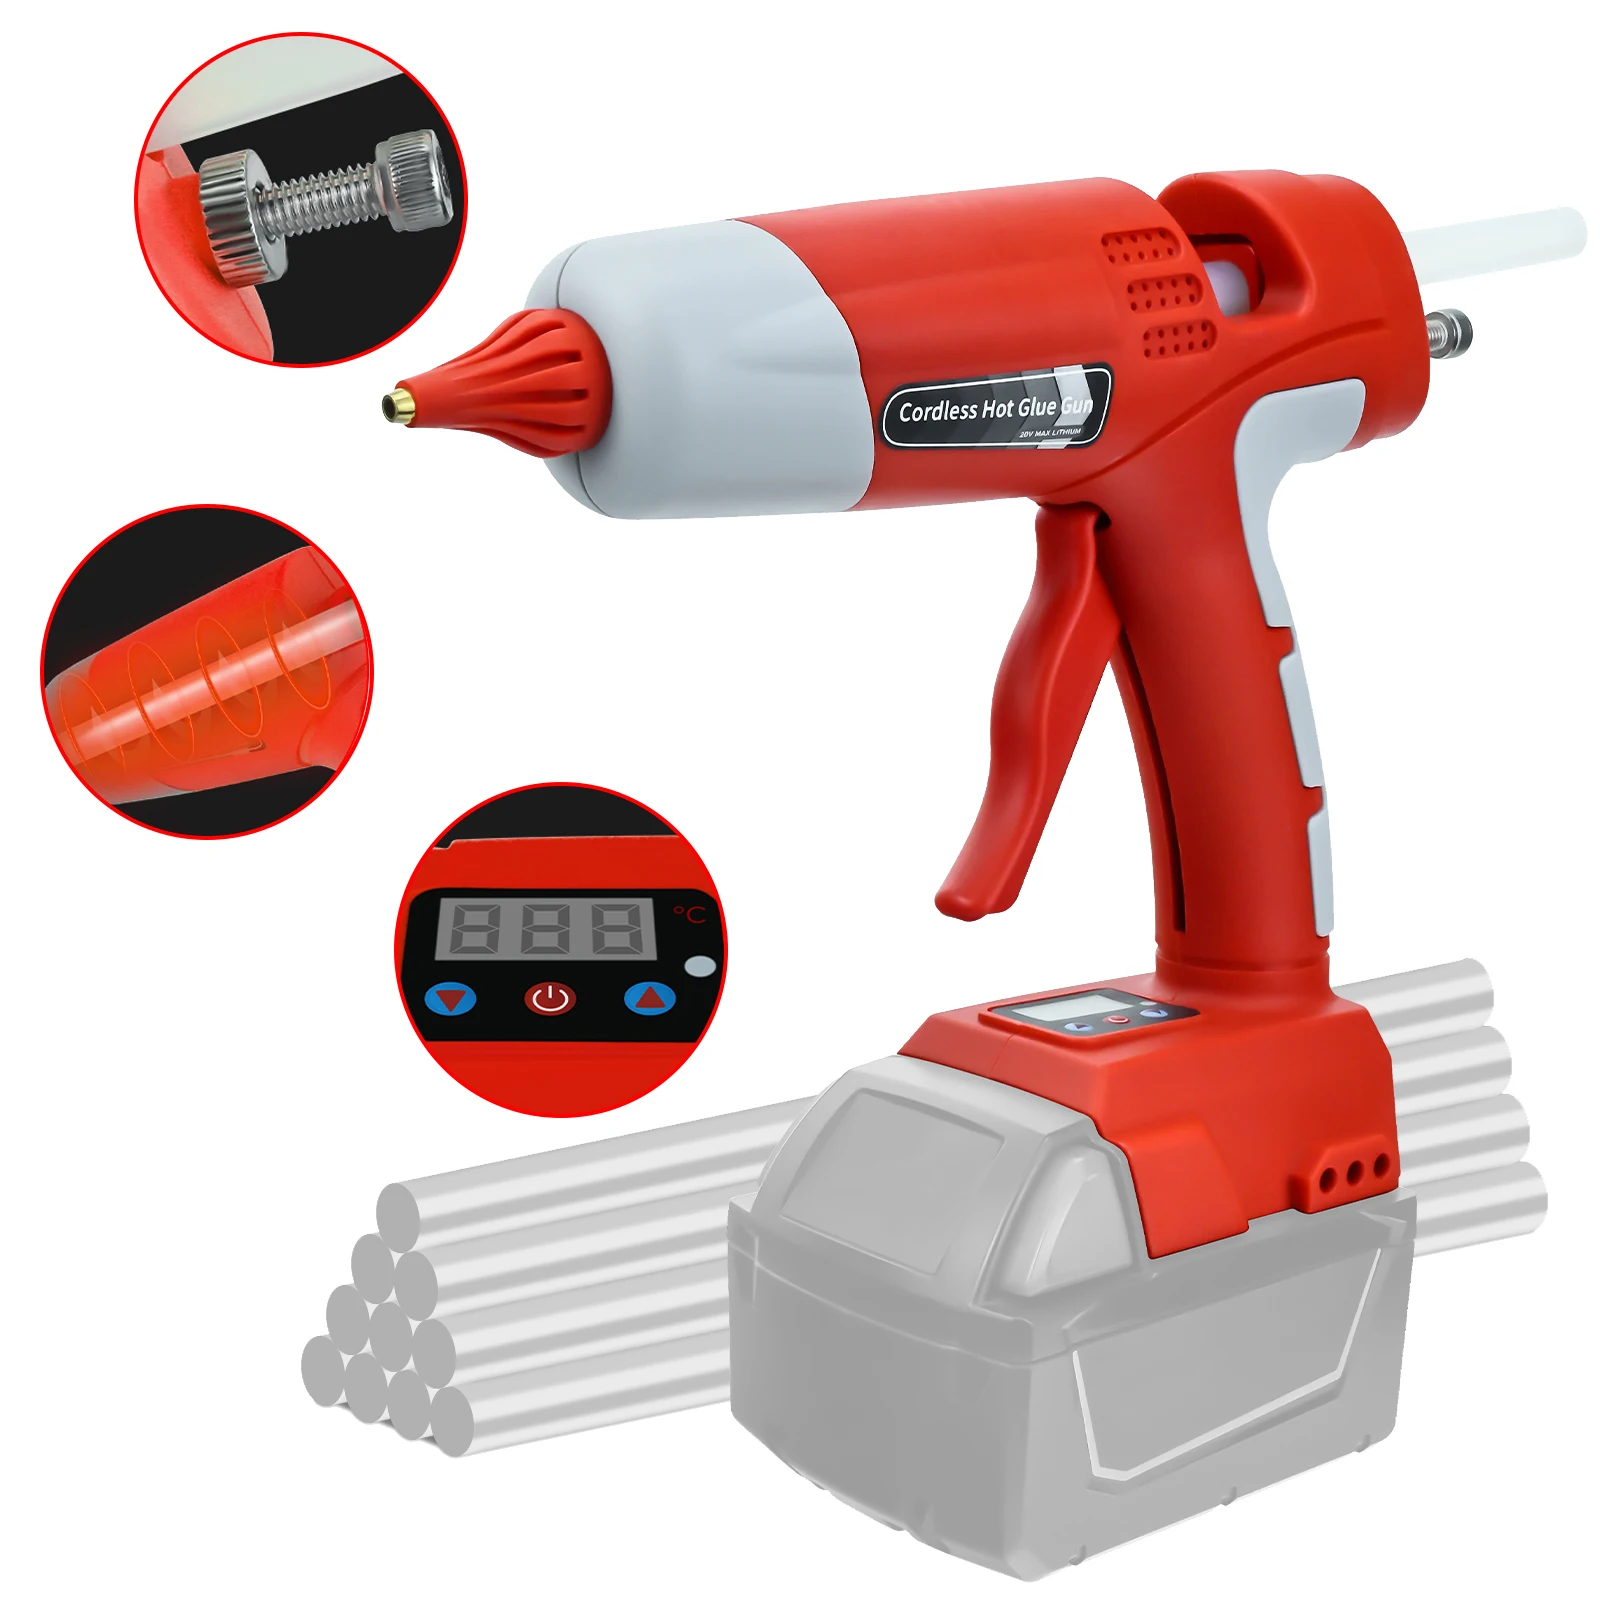 100W Cordless Hot Melt Glue Gun for Milwaukee 18V Battery with 10pcs 11mm Sticks for Home Repair Arts & Crafts (No Battery)